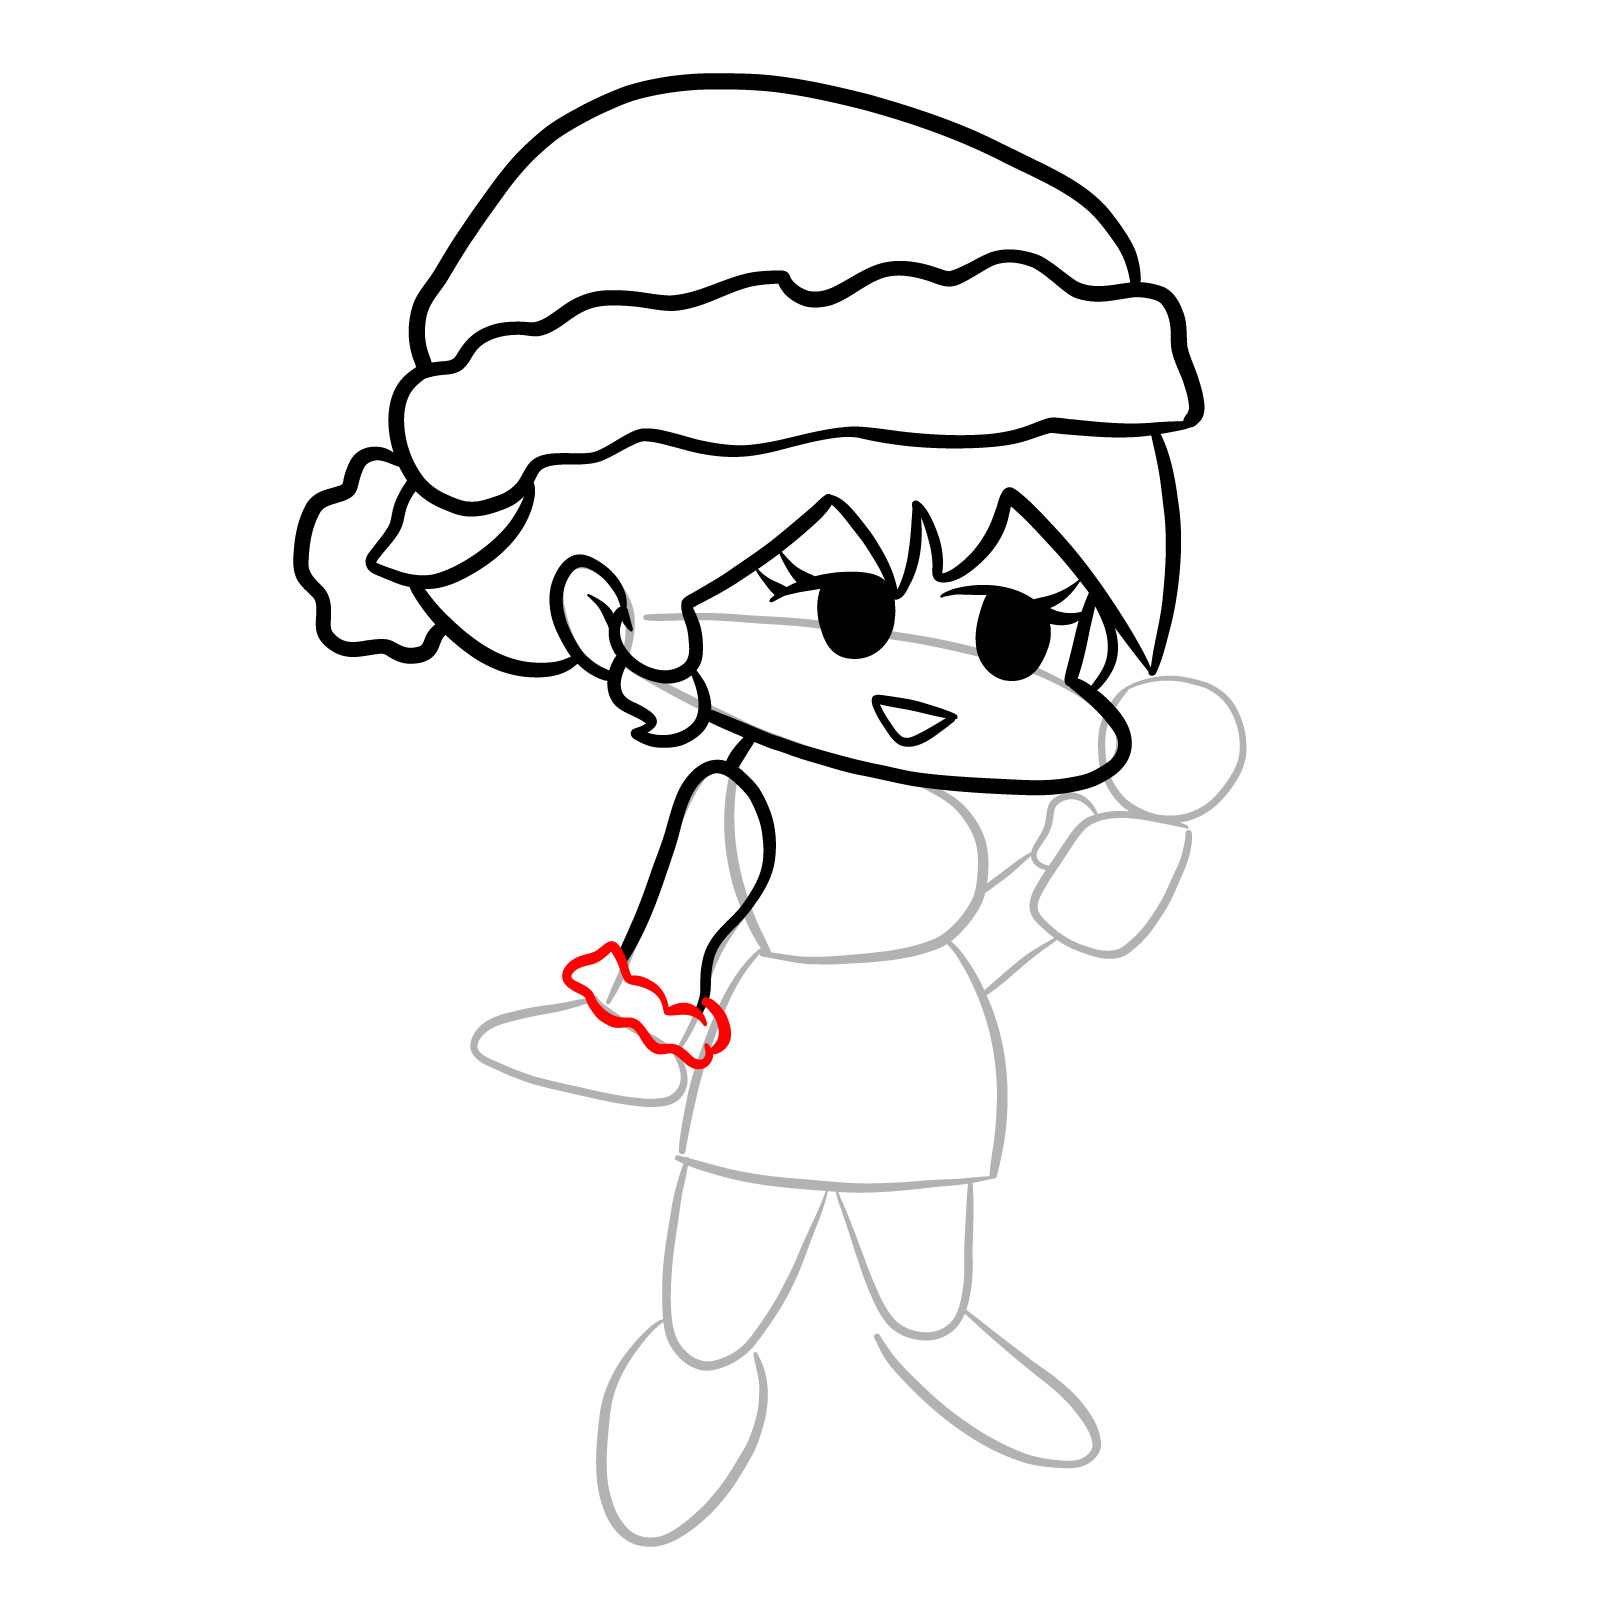 How to draw standing Santa GF - step 14